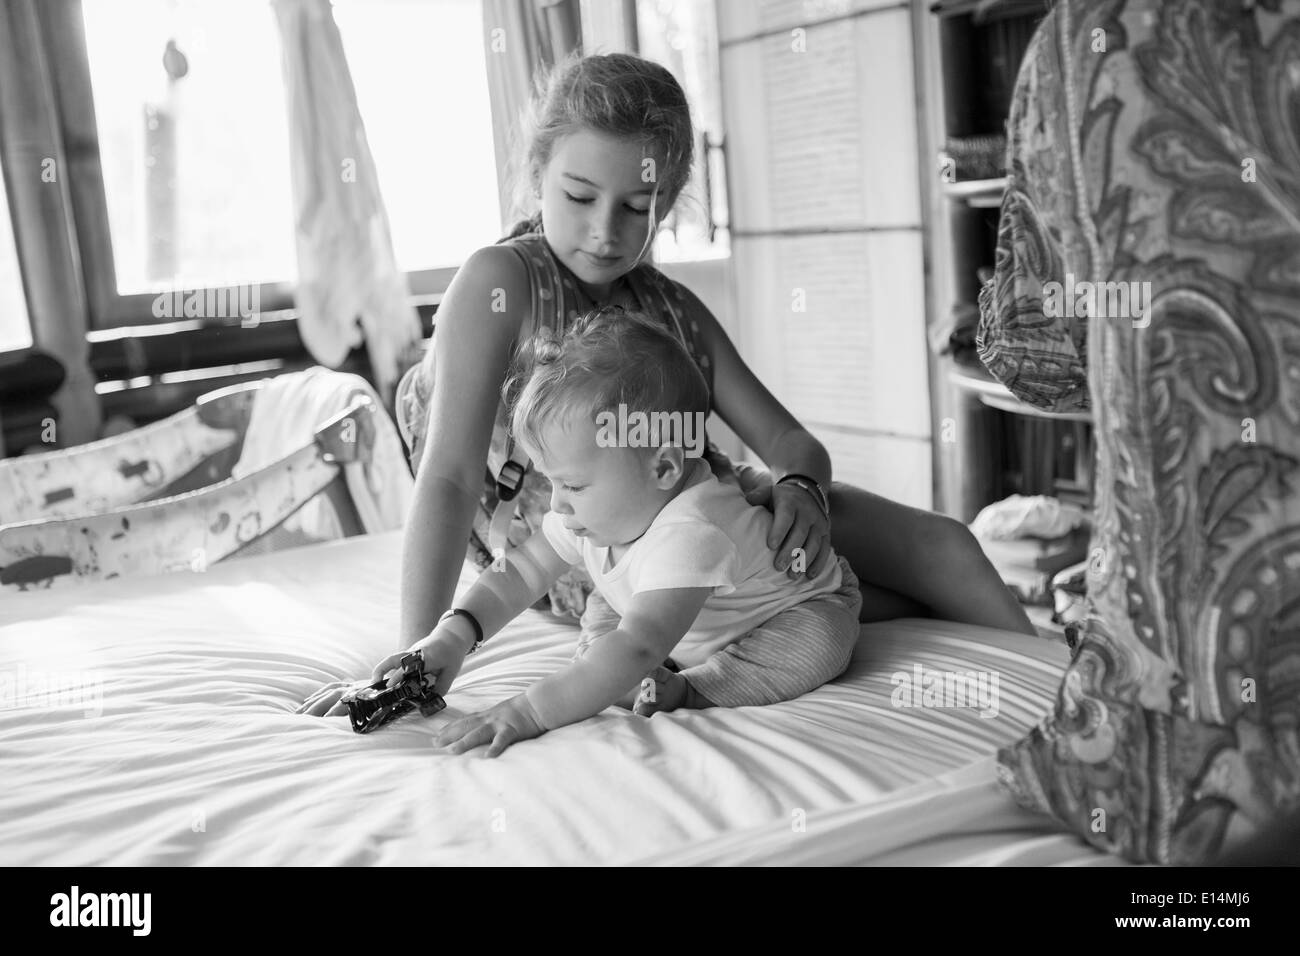 Caucasian girl et baby boy playing on bed Banque D'Images